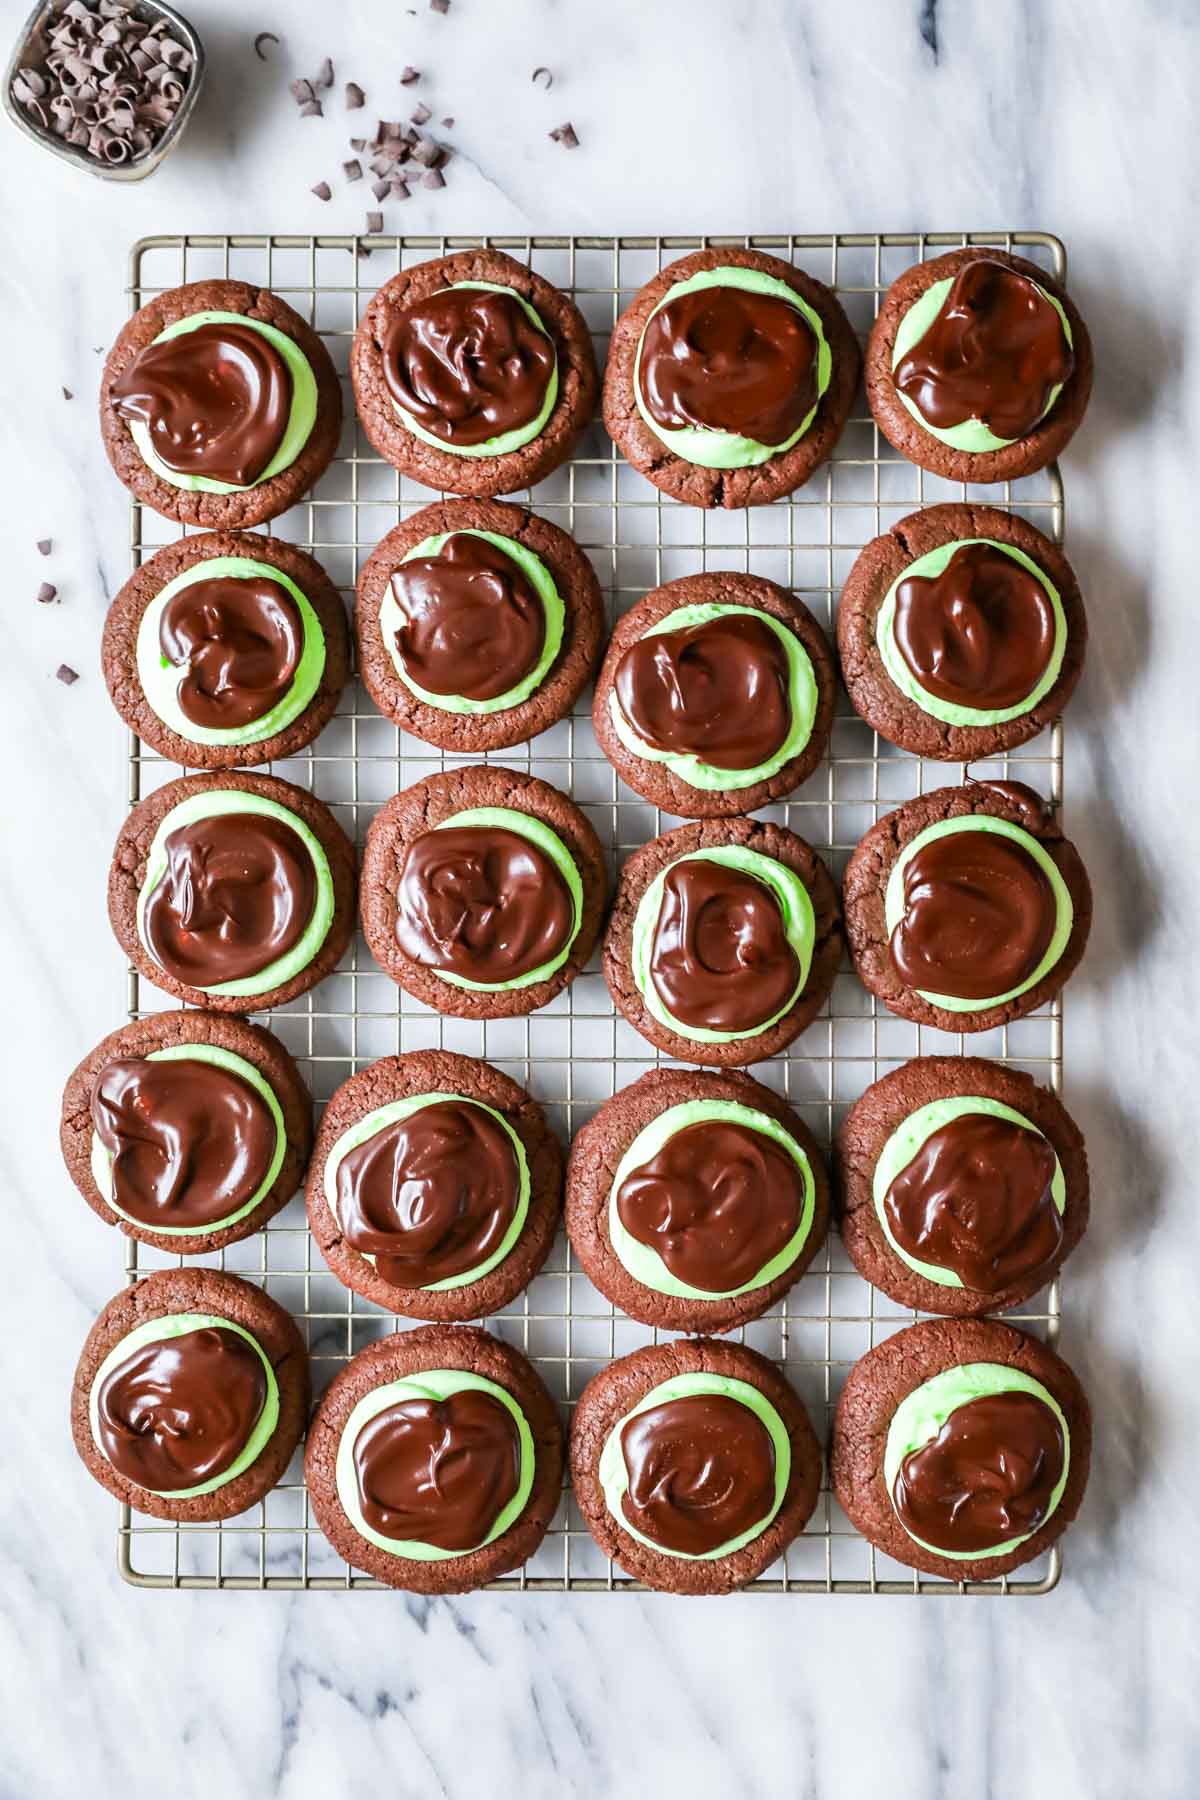 Overhead view of rows of chocolate cookies topped with mint frosting and chocolate ganache.